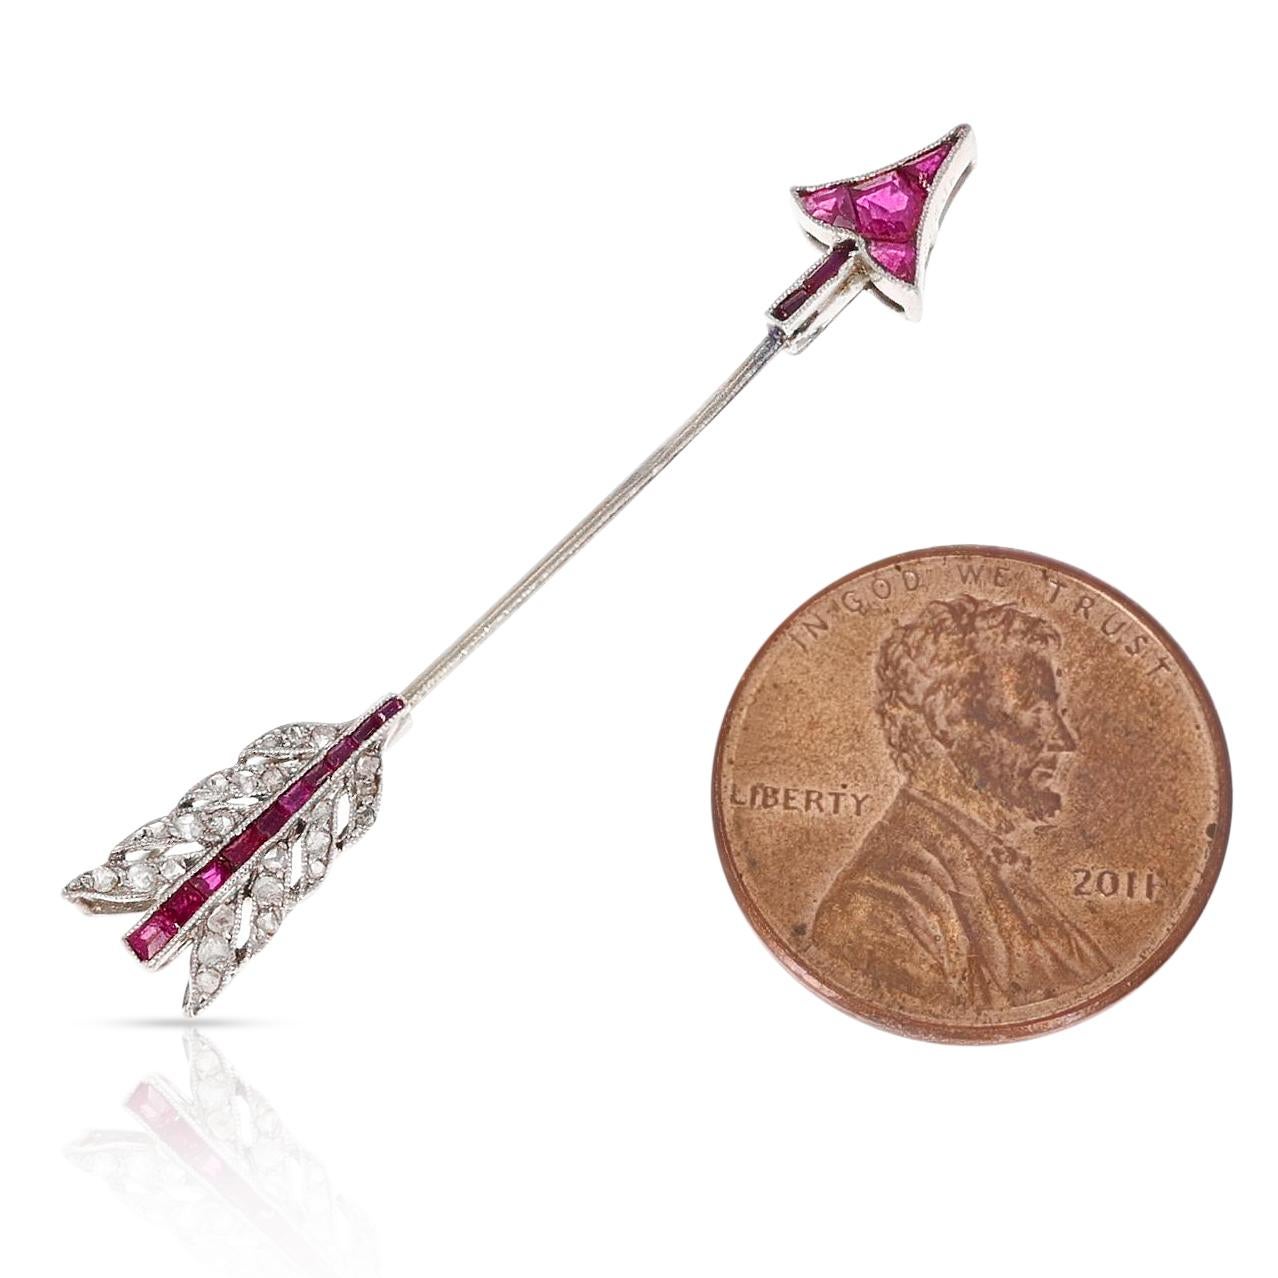 A Van Cleef & Arpels Ruby and Diamond Arrow Pin made in 18 Karat Gold. The length is 4.5CM and the width is .25CM. There are 24 diamonds and the total weight is 2.16 grams. 